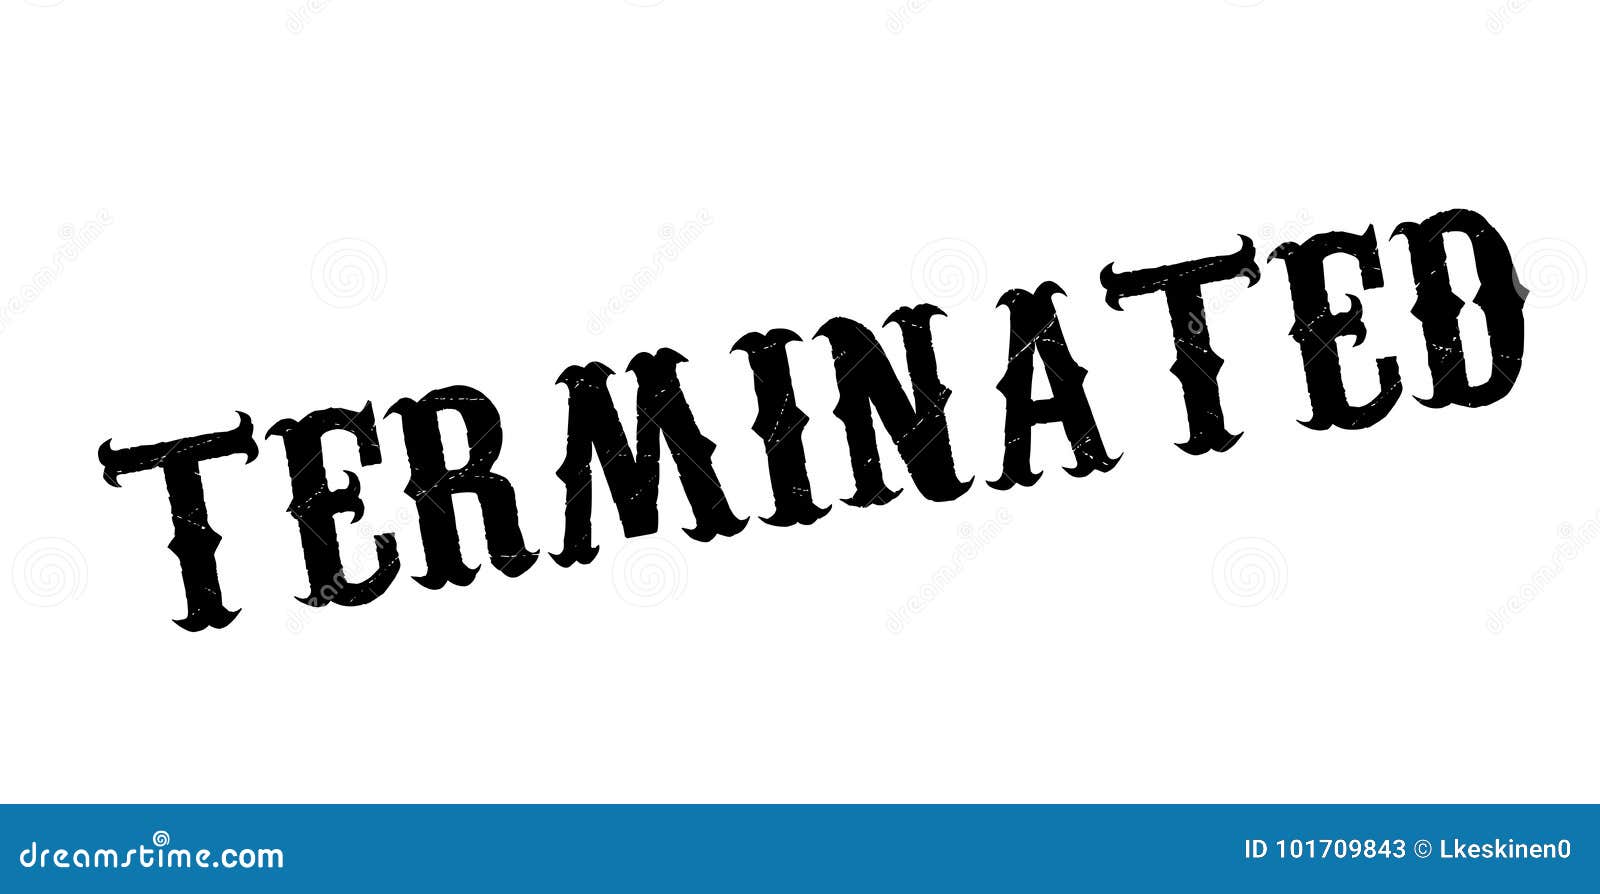 Terminated rubber stamp stock vector. Illustration of business - 101709843